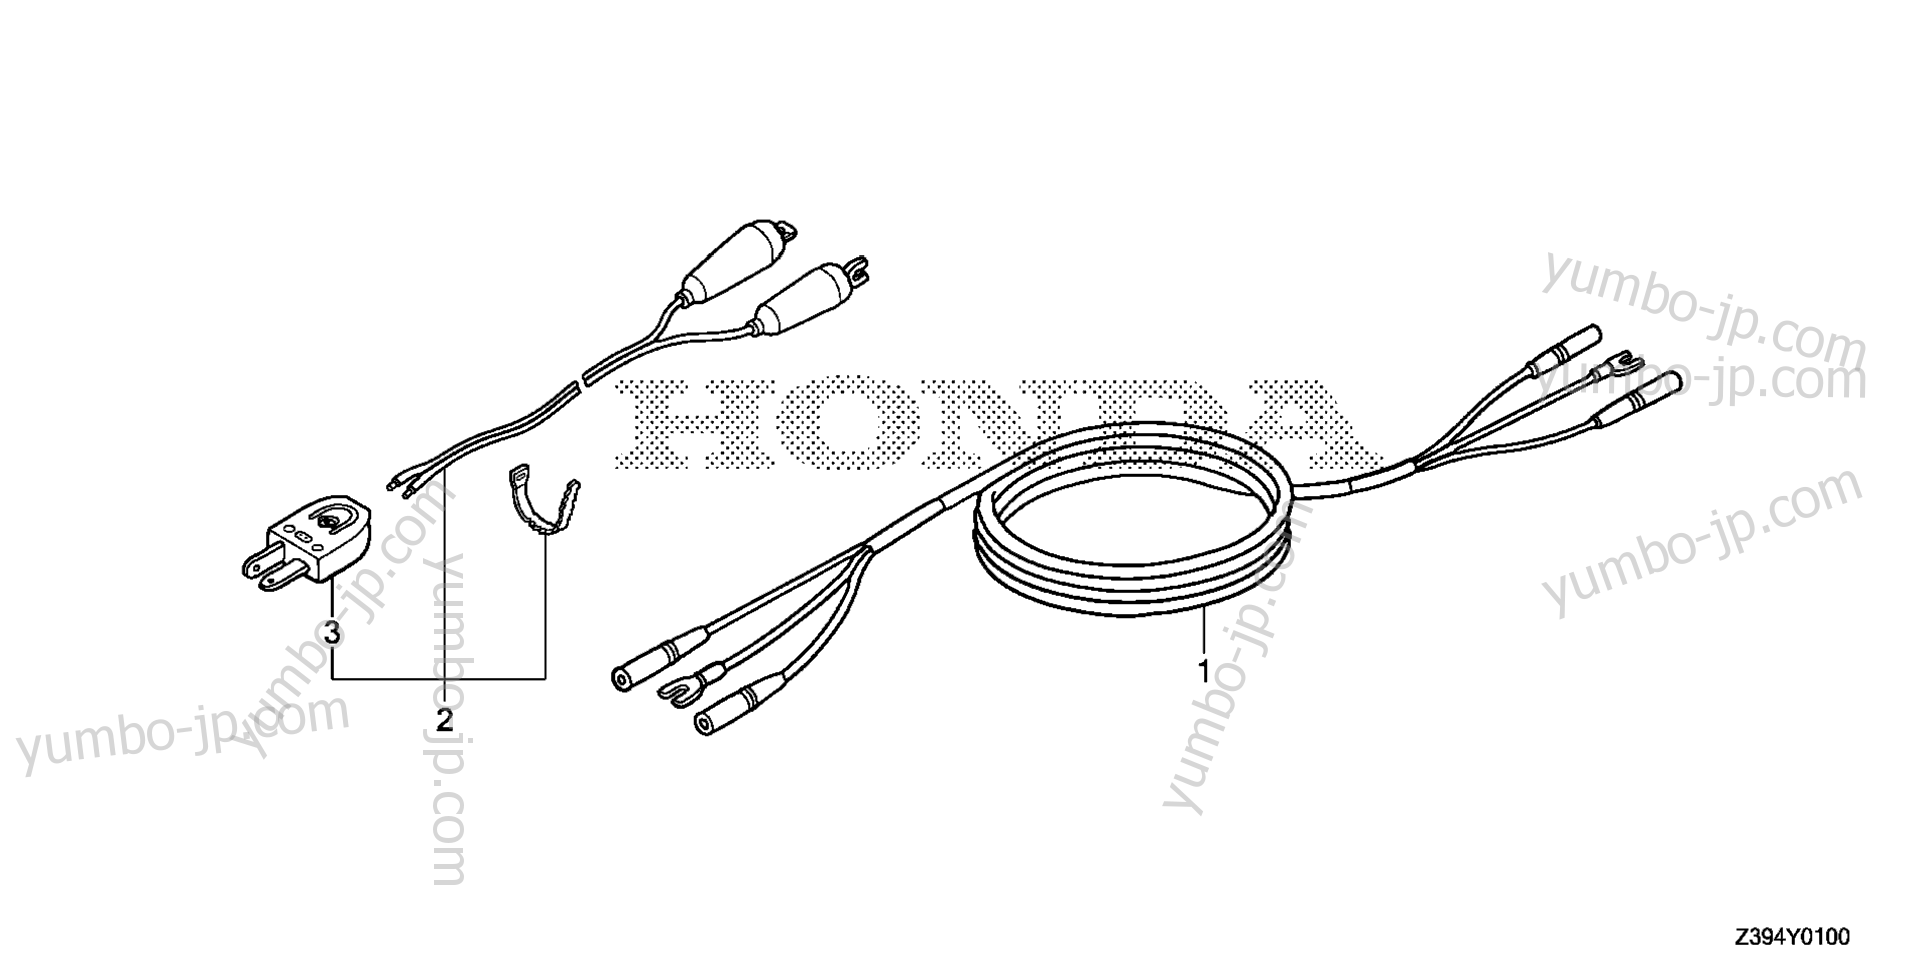 PARALLEL CABLE KIT / CHARGE CORD for Generators HONDA EU2000IT1 A1 